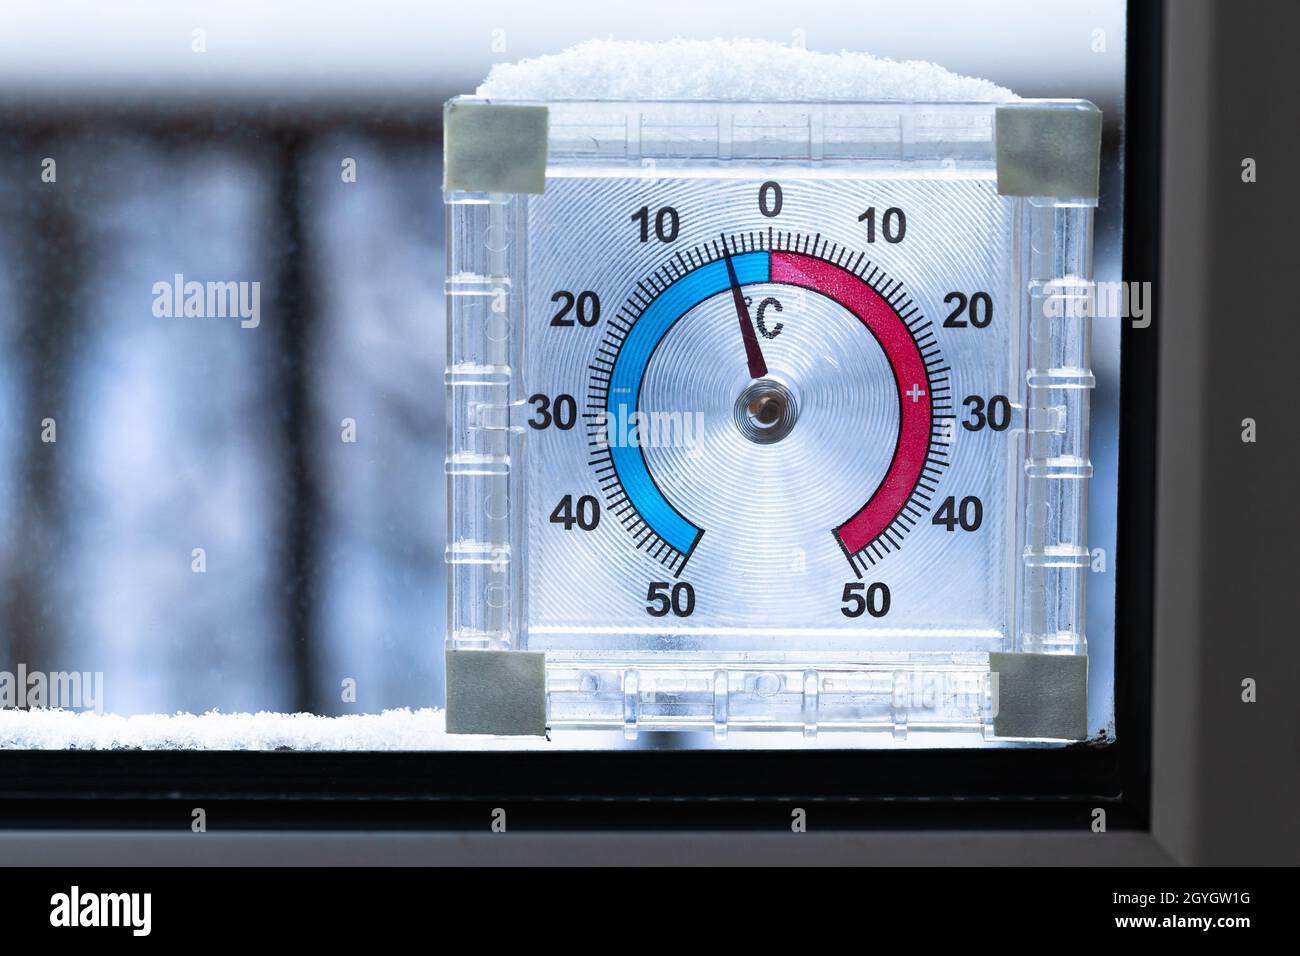 Outdoor window thermometer covering with snow shows negative temperature in degrees Celsius. Closeup photo with selective focus Stock Photo